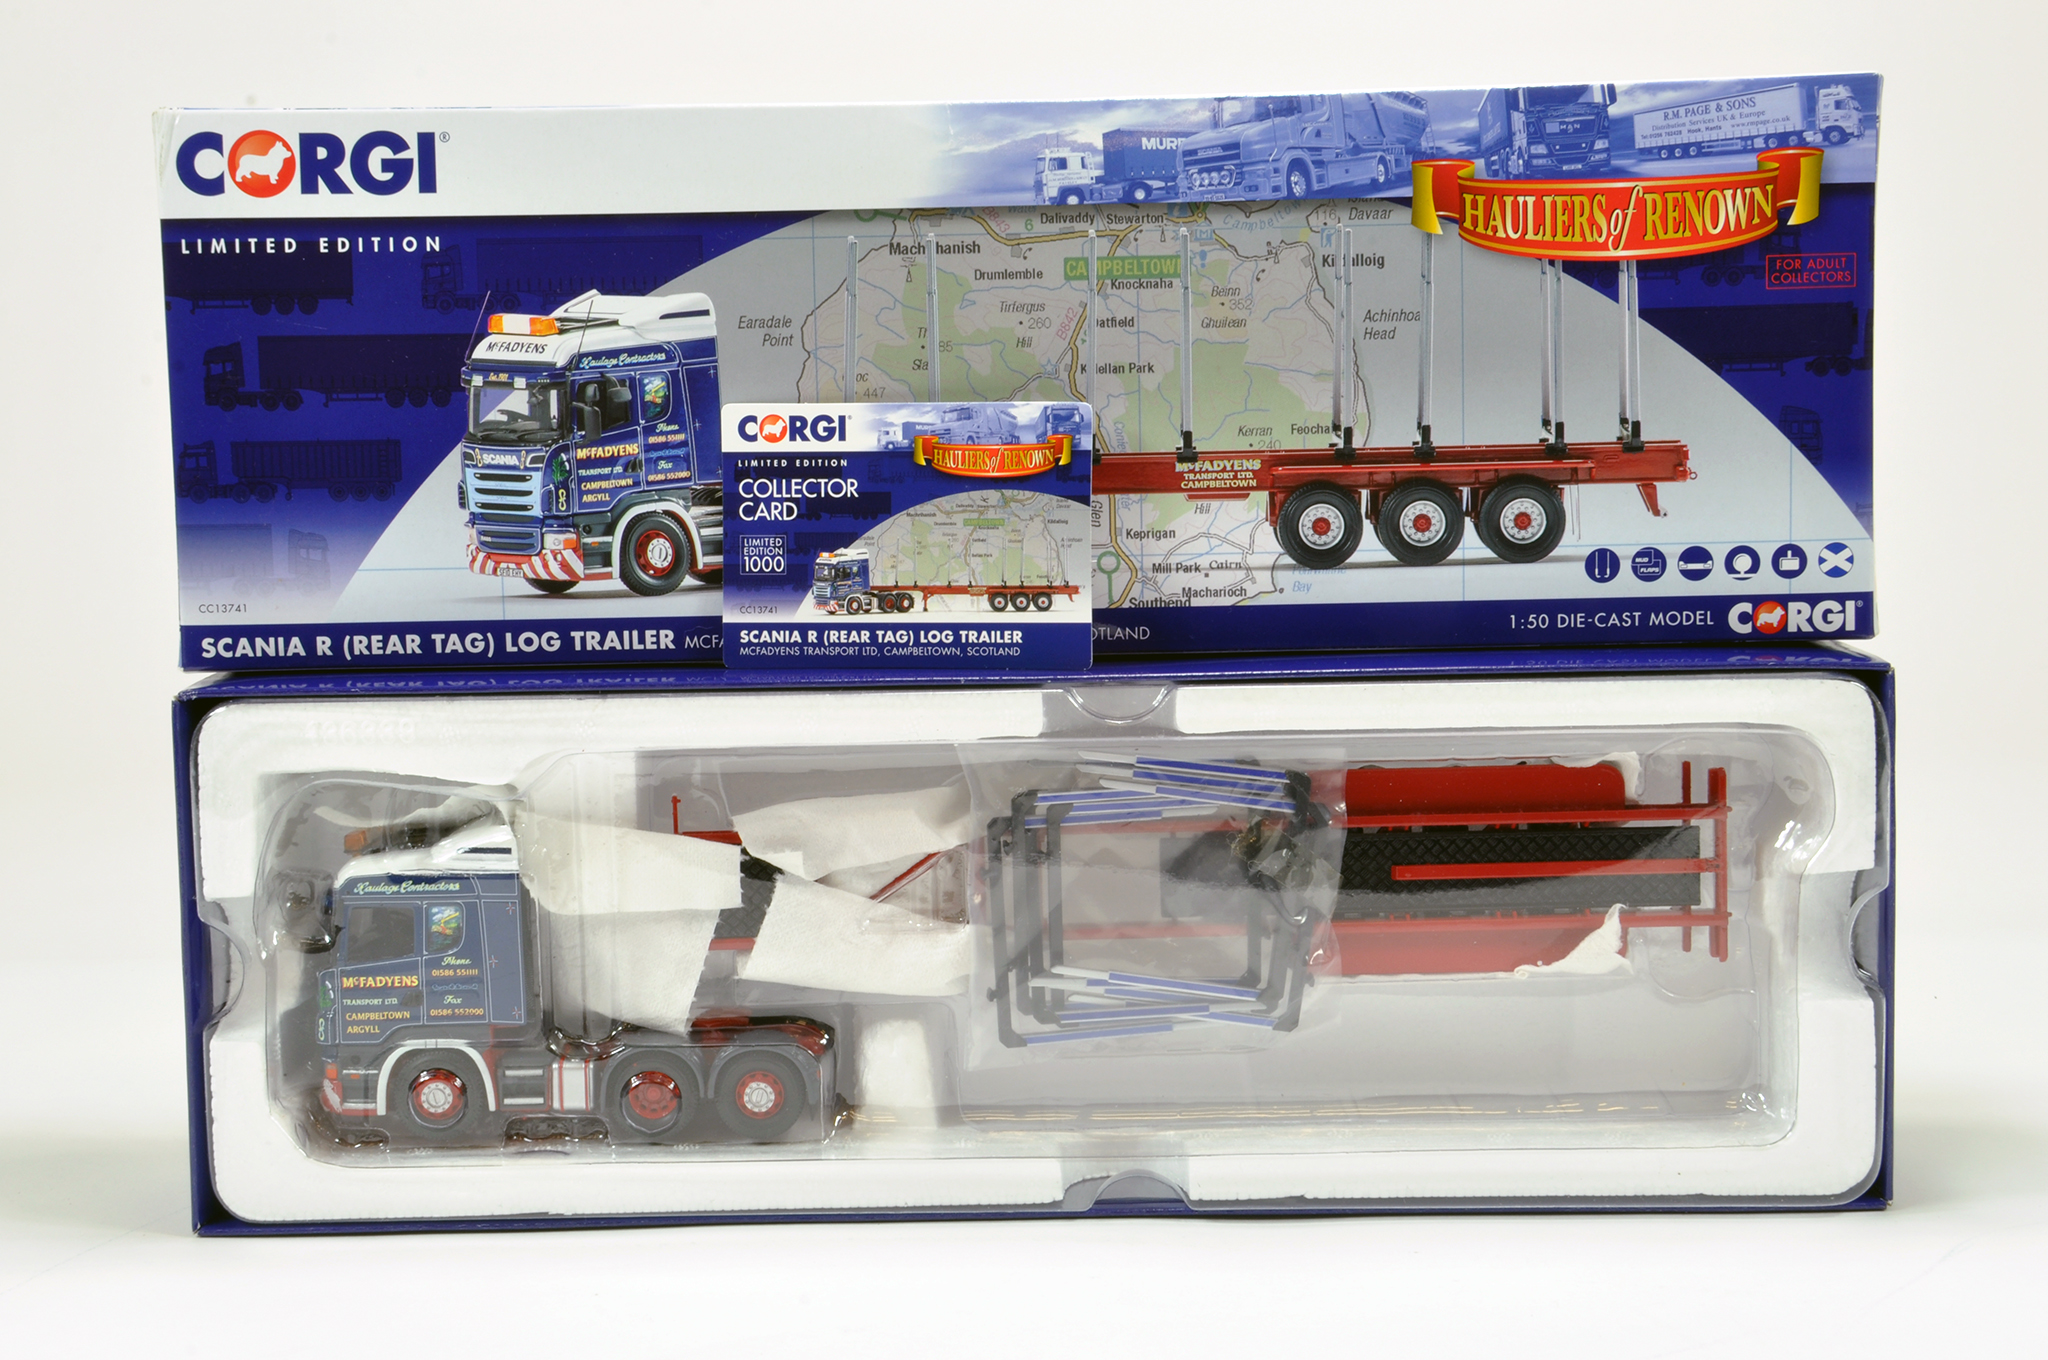 Corgi Diecast Truck Issue comprising No. CC13741 Scania R Log Trailer in livery of McFaydens